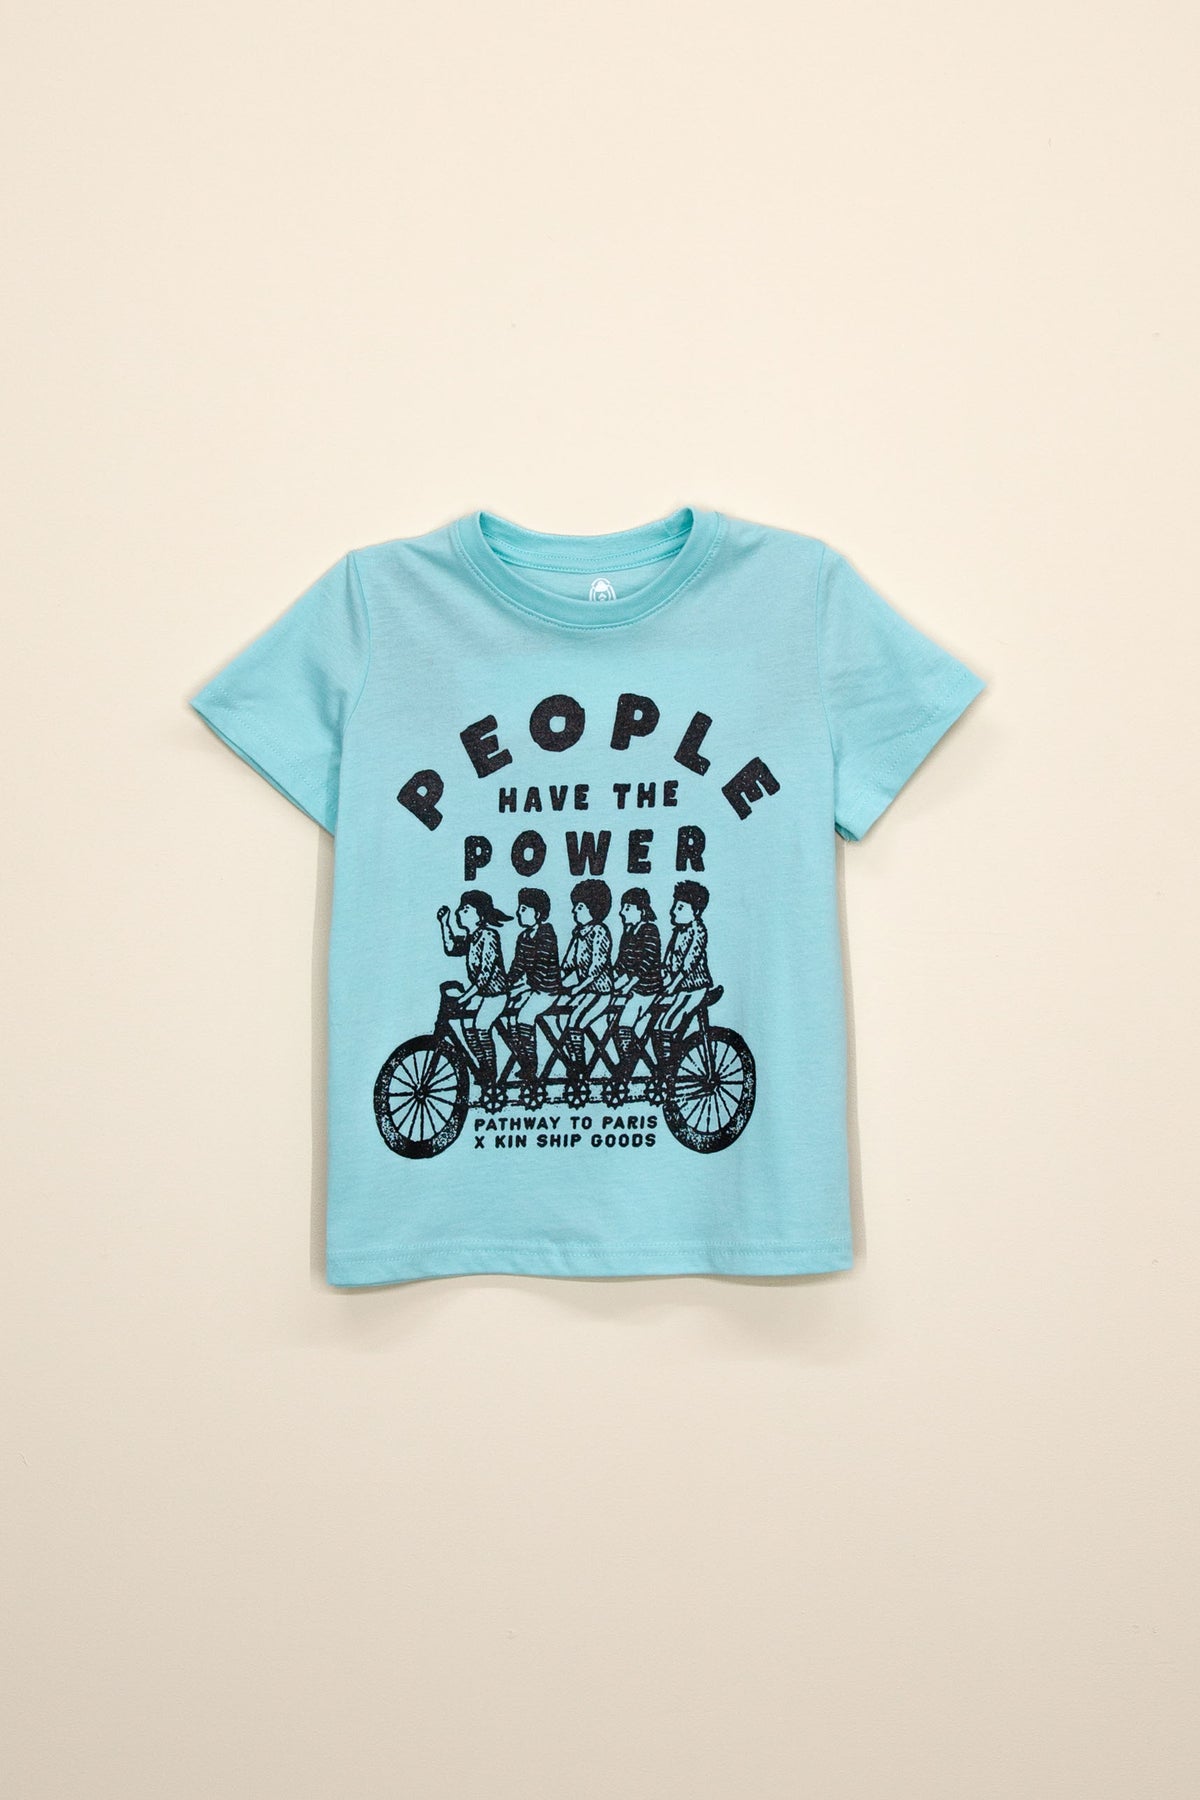 people have the power kids tee